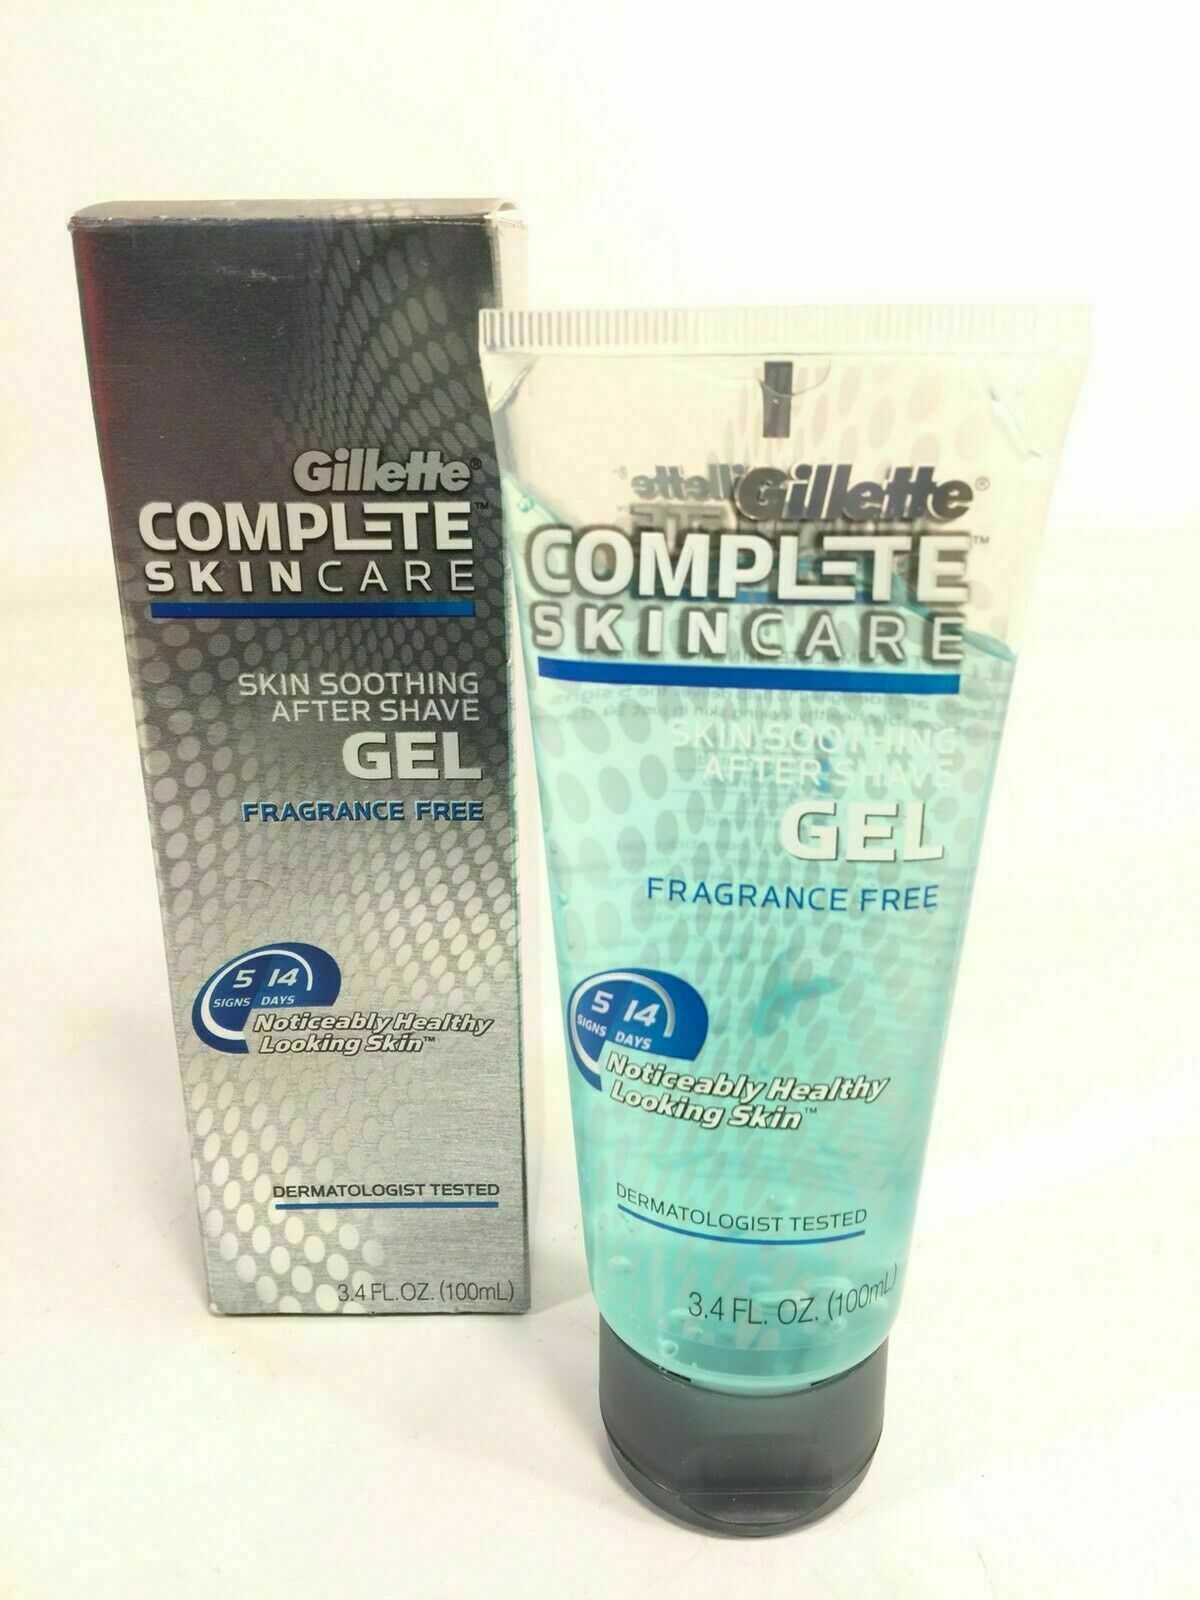 Gillette Compete Skin Care Fragrance Free Soothing After Shave Gel Rare Product - $56.42